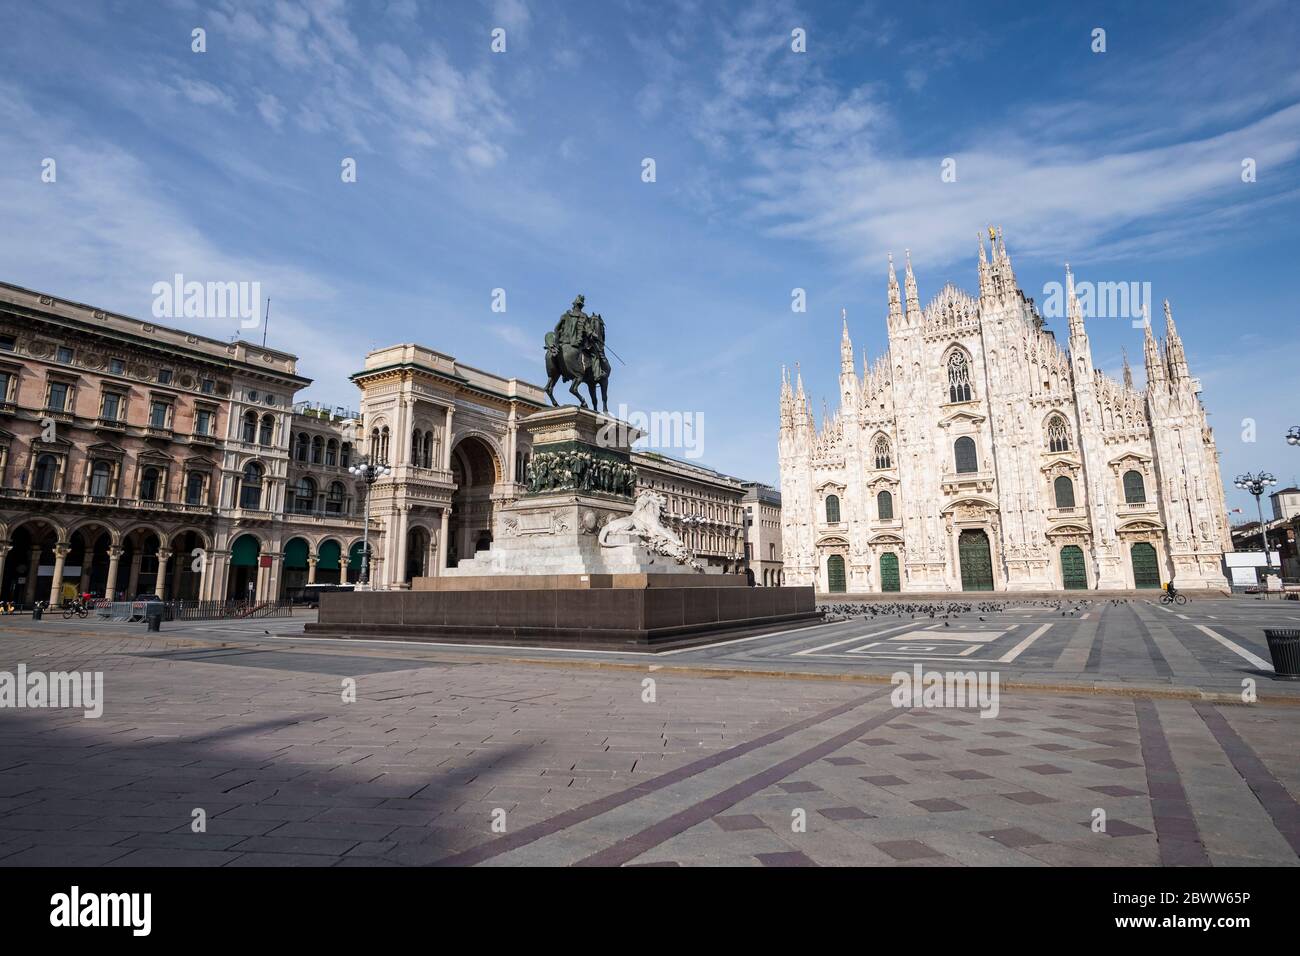 Italy, Milan, Monument to Victor Emmanuel II standing at empty Piazza del Duomo during COVID-19 outbreak Stock Photo